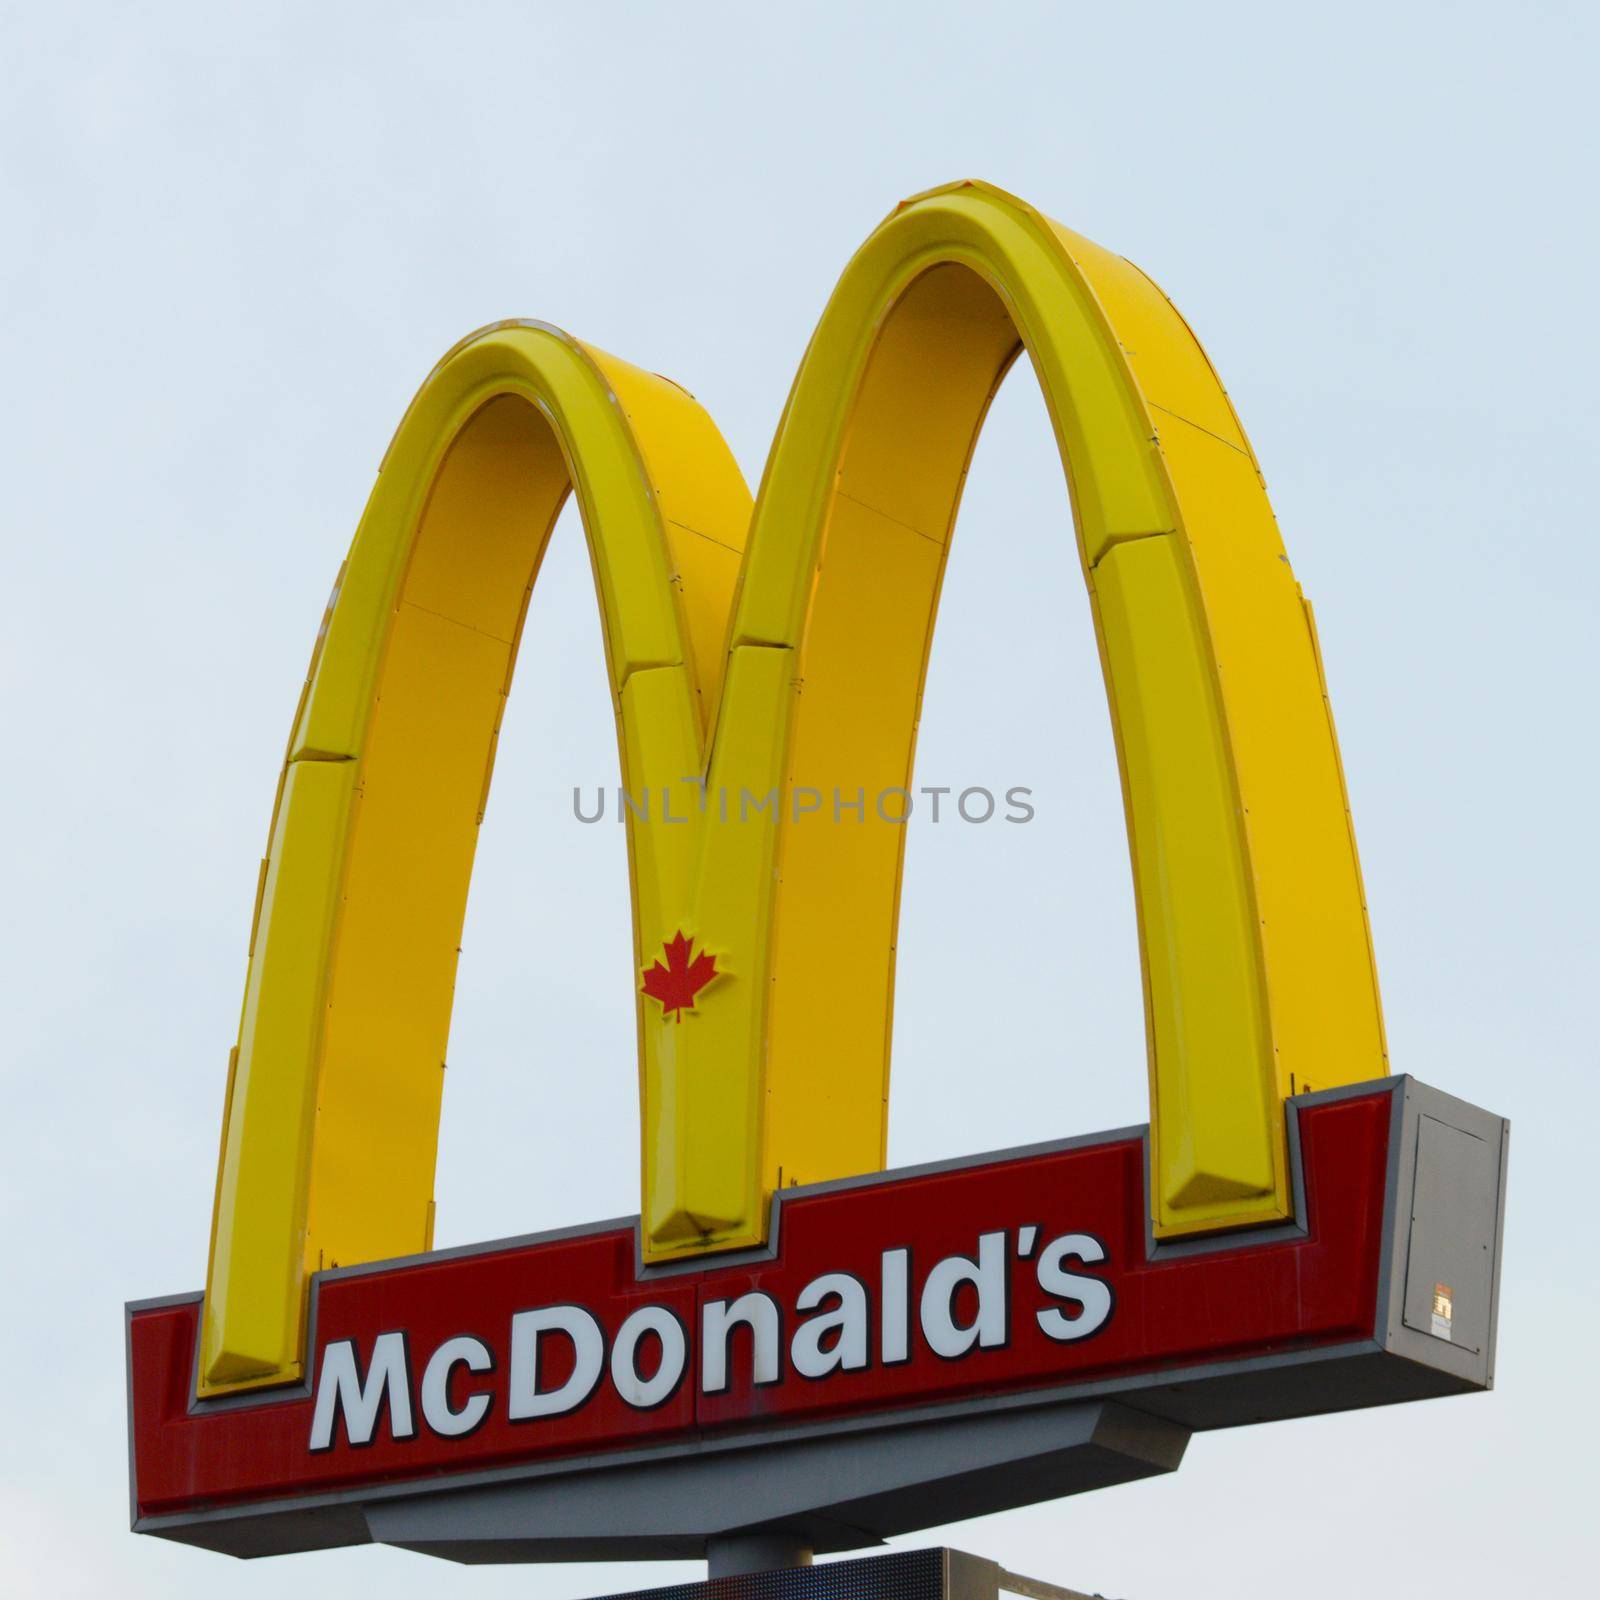 McDonalds Restaurant Sign by AlphaBaby